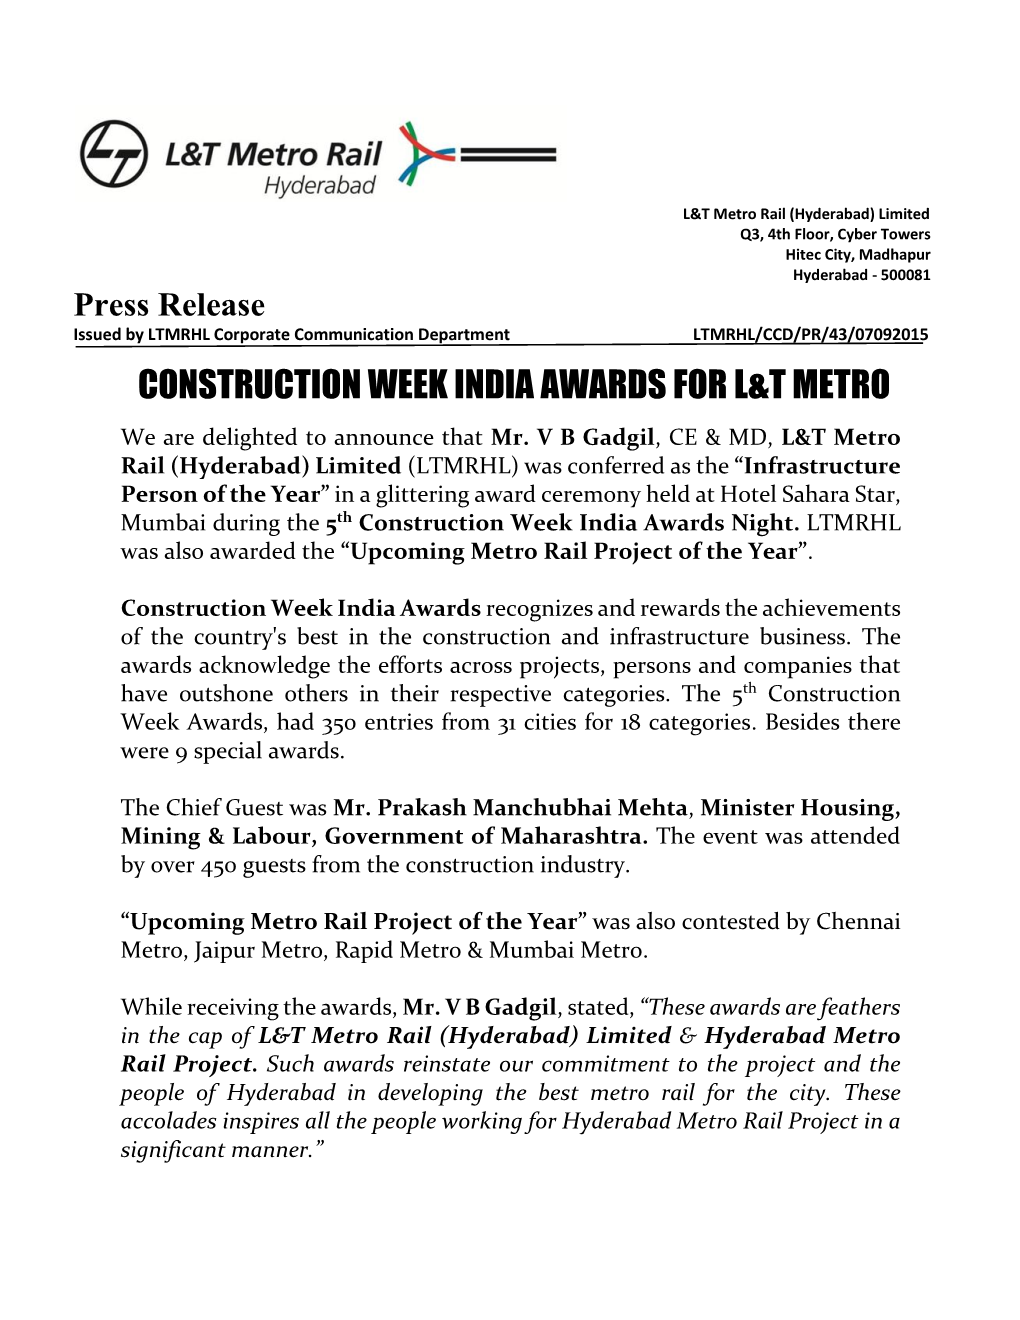 Construction Week India Awards for L&T Metro